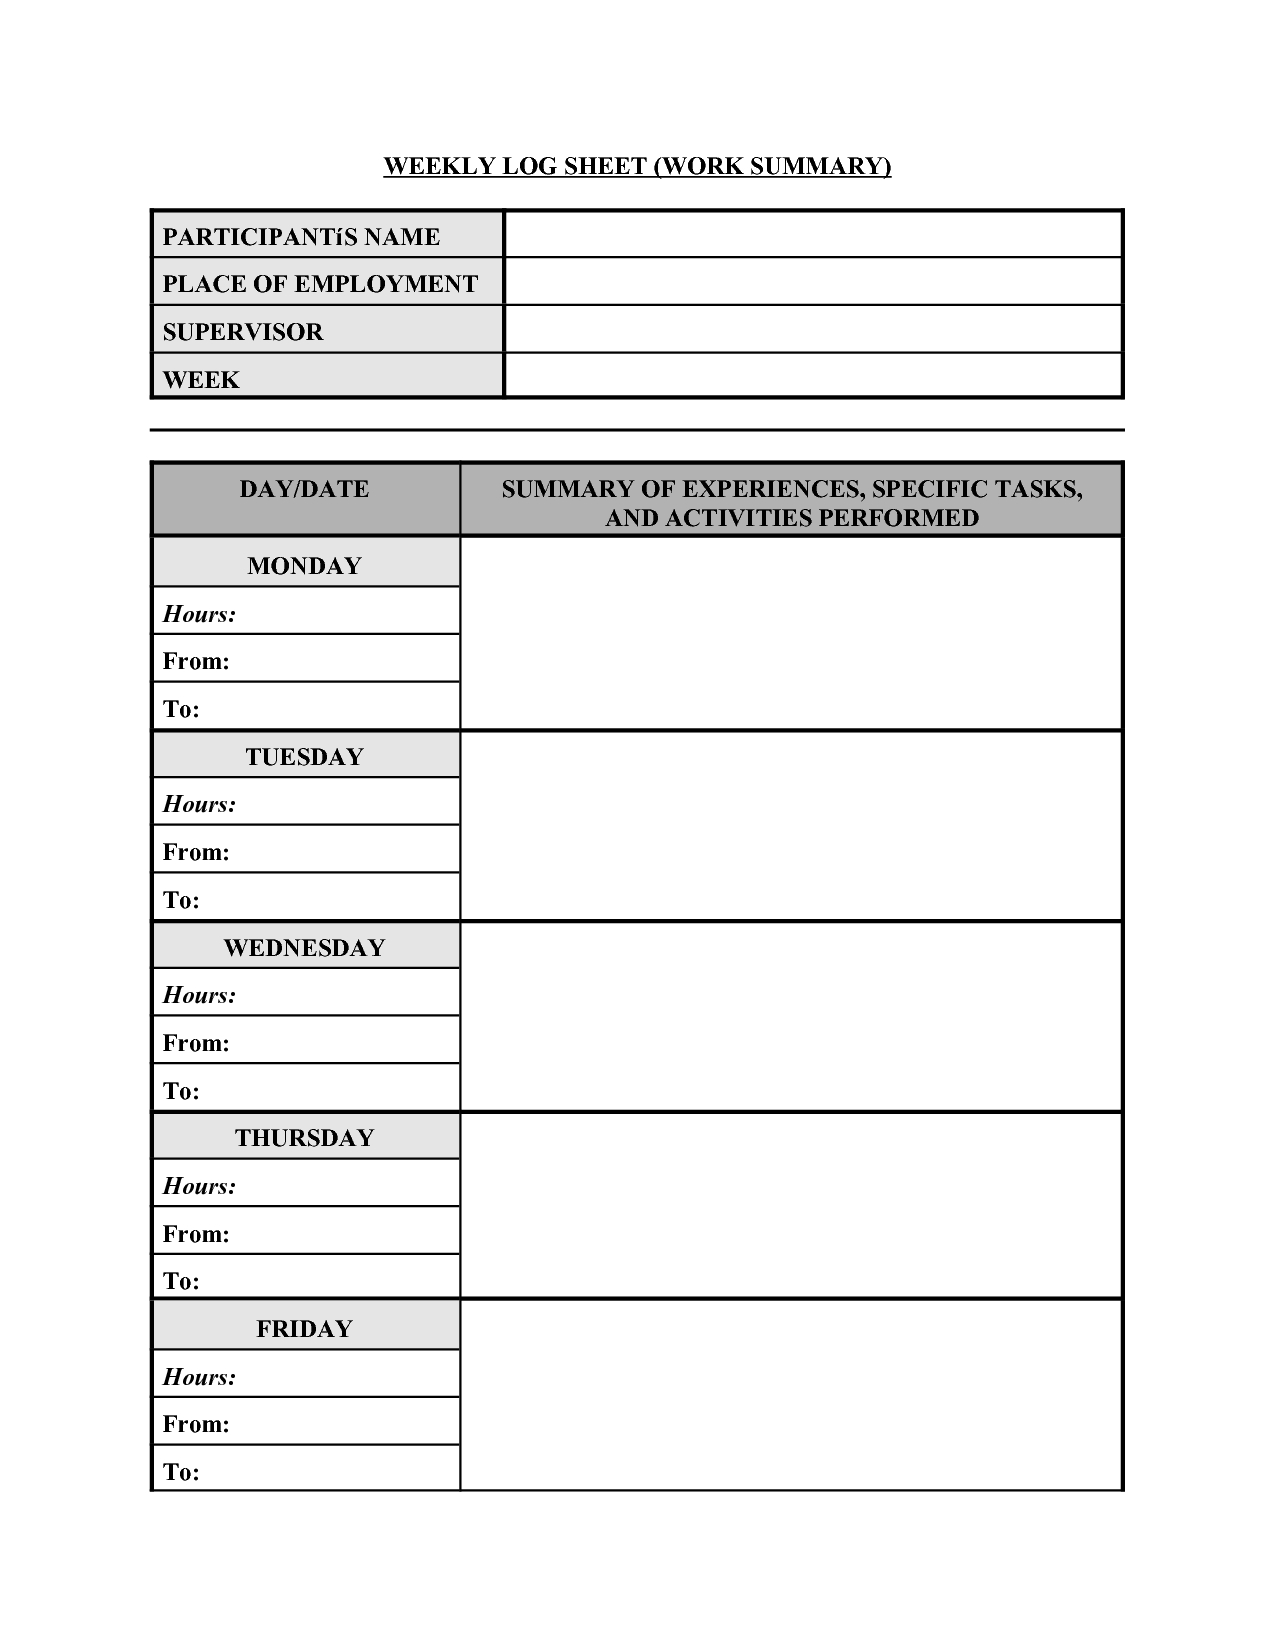 Best Photos Of Work Summary Template - Weekly Work Log Sheet With Work Summary Report Template